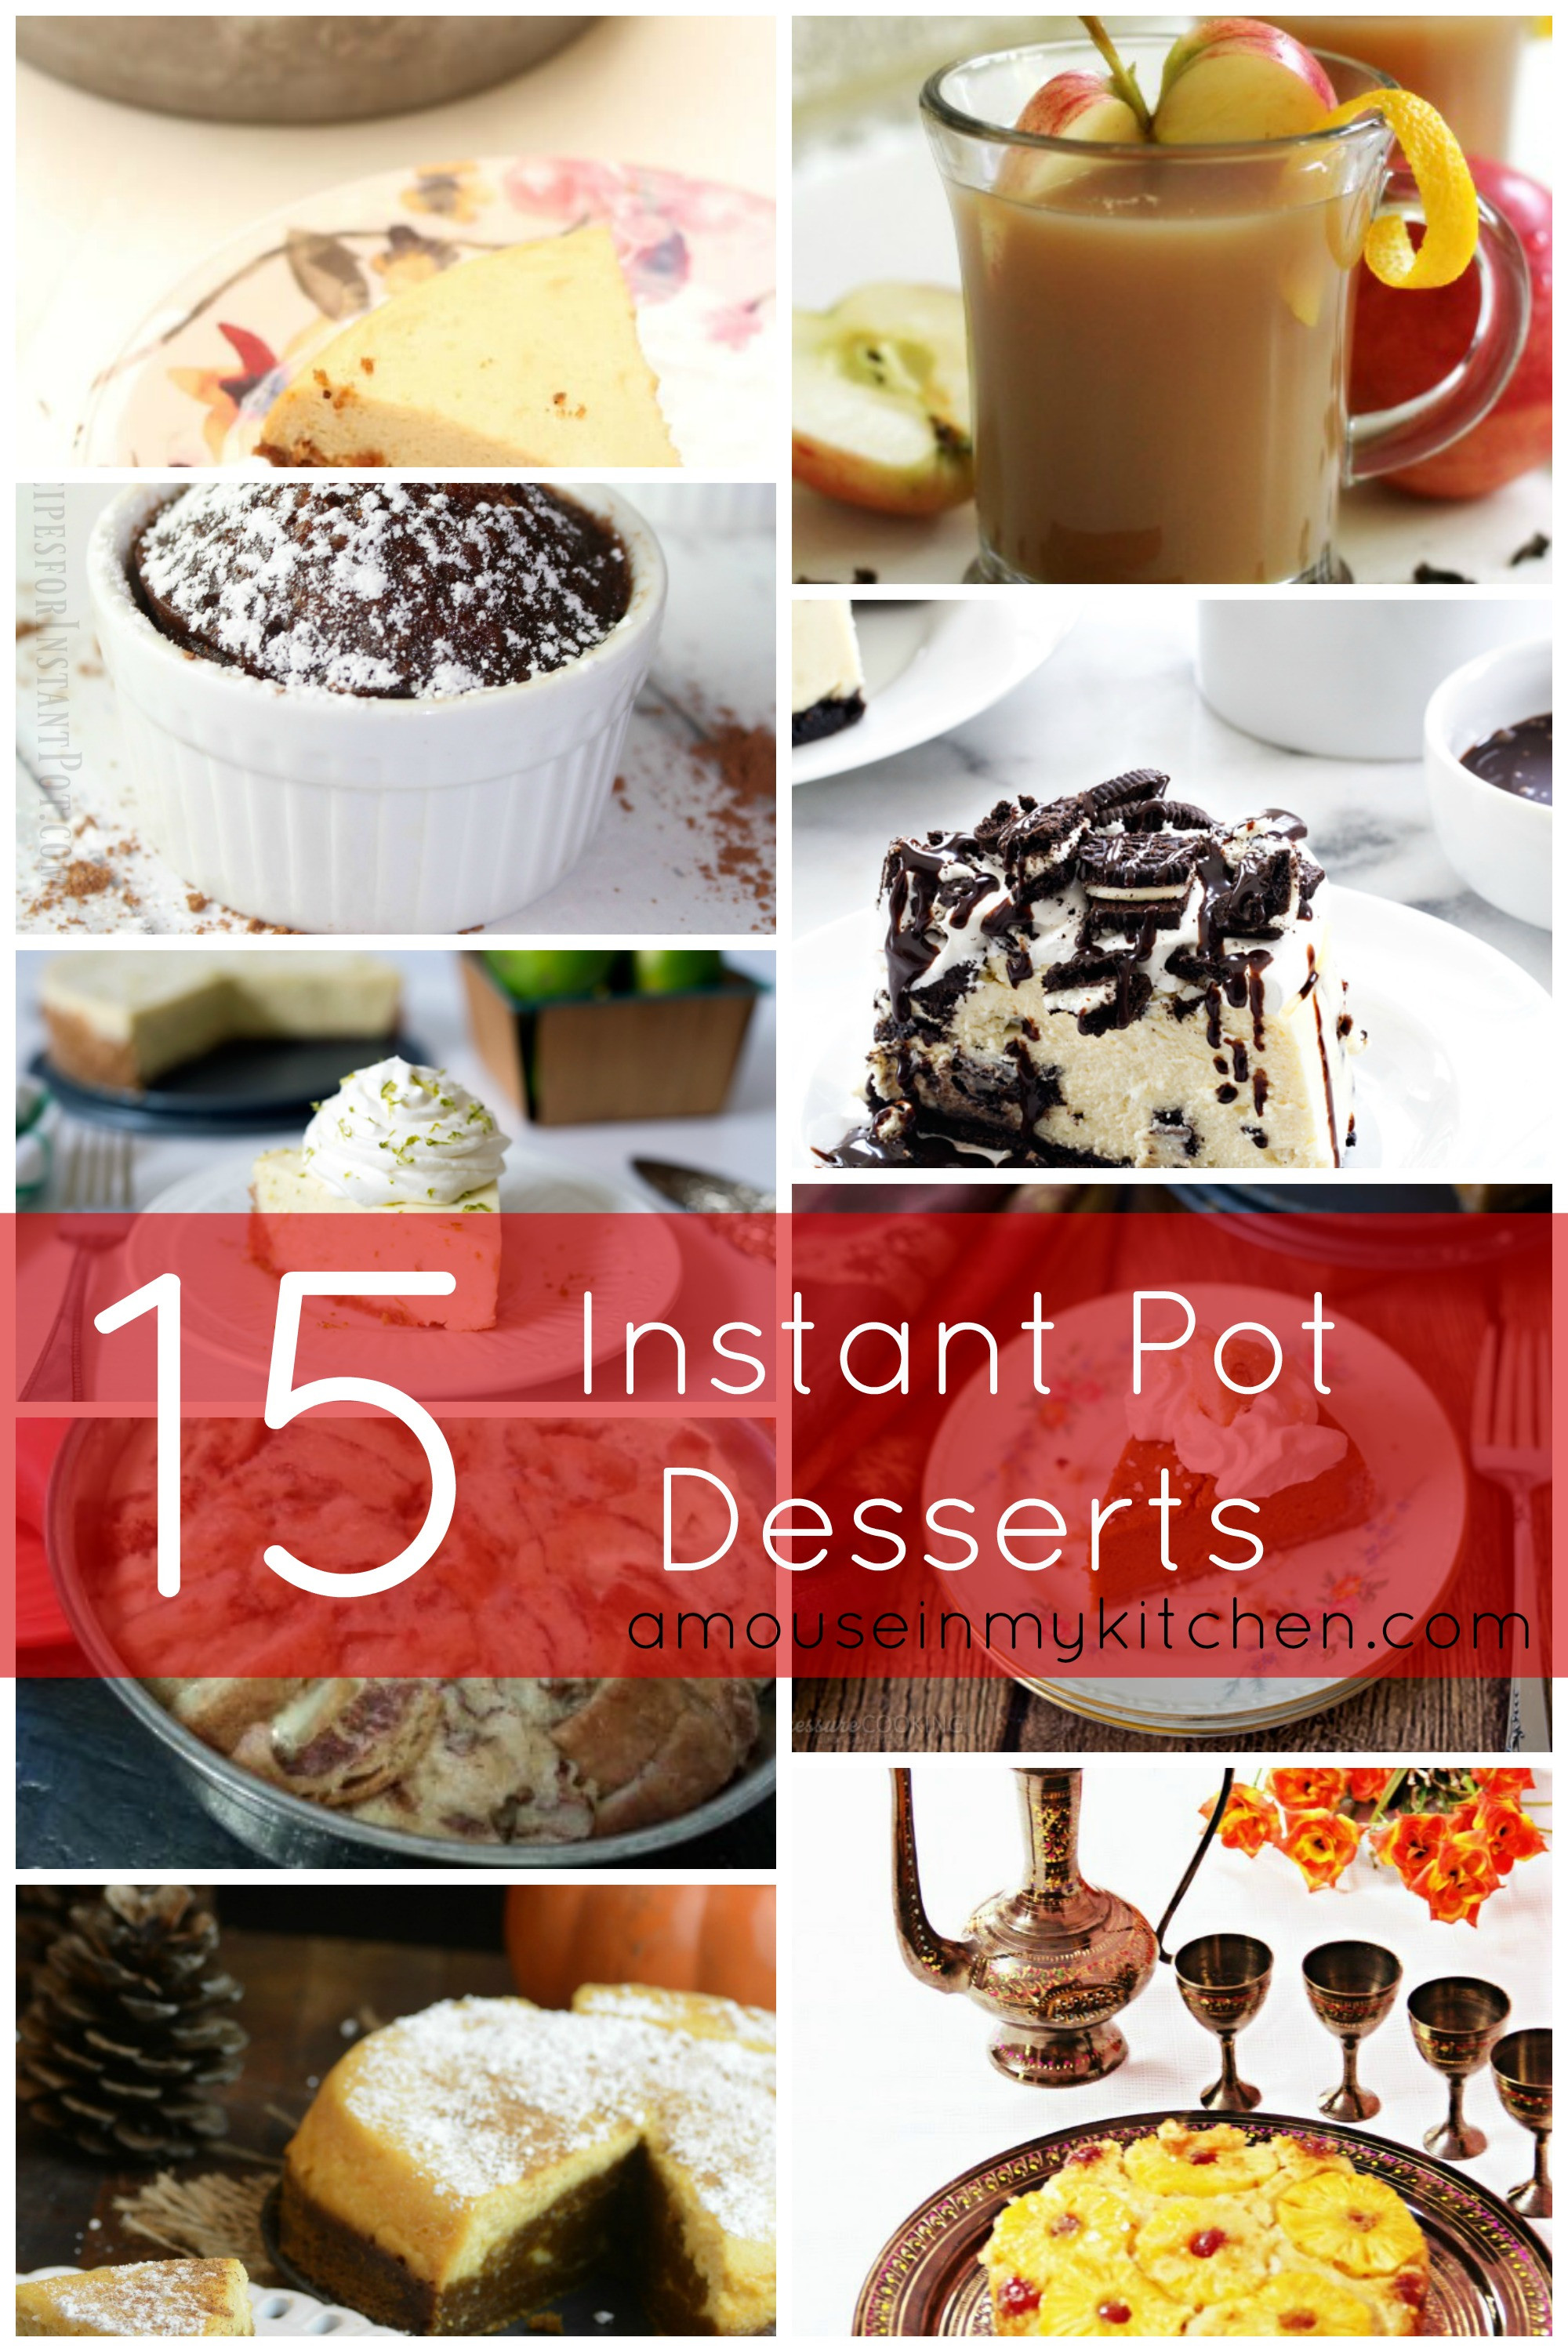 Healthy Instant Pot Desserts
 15 Instant Pot Desserts A Mouse In My Kitchen